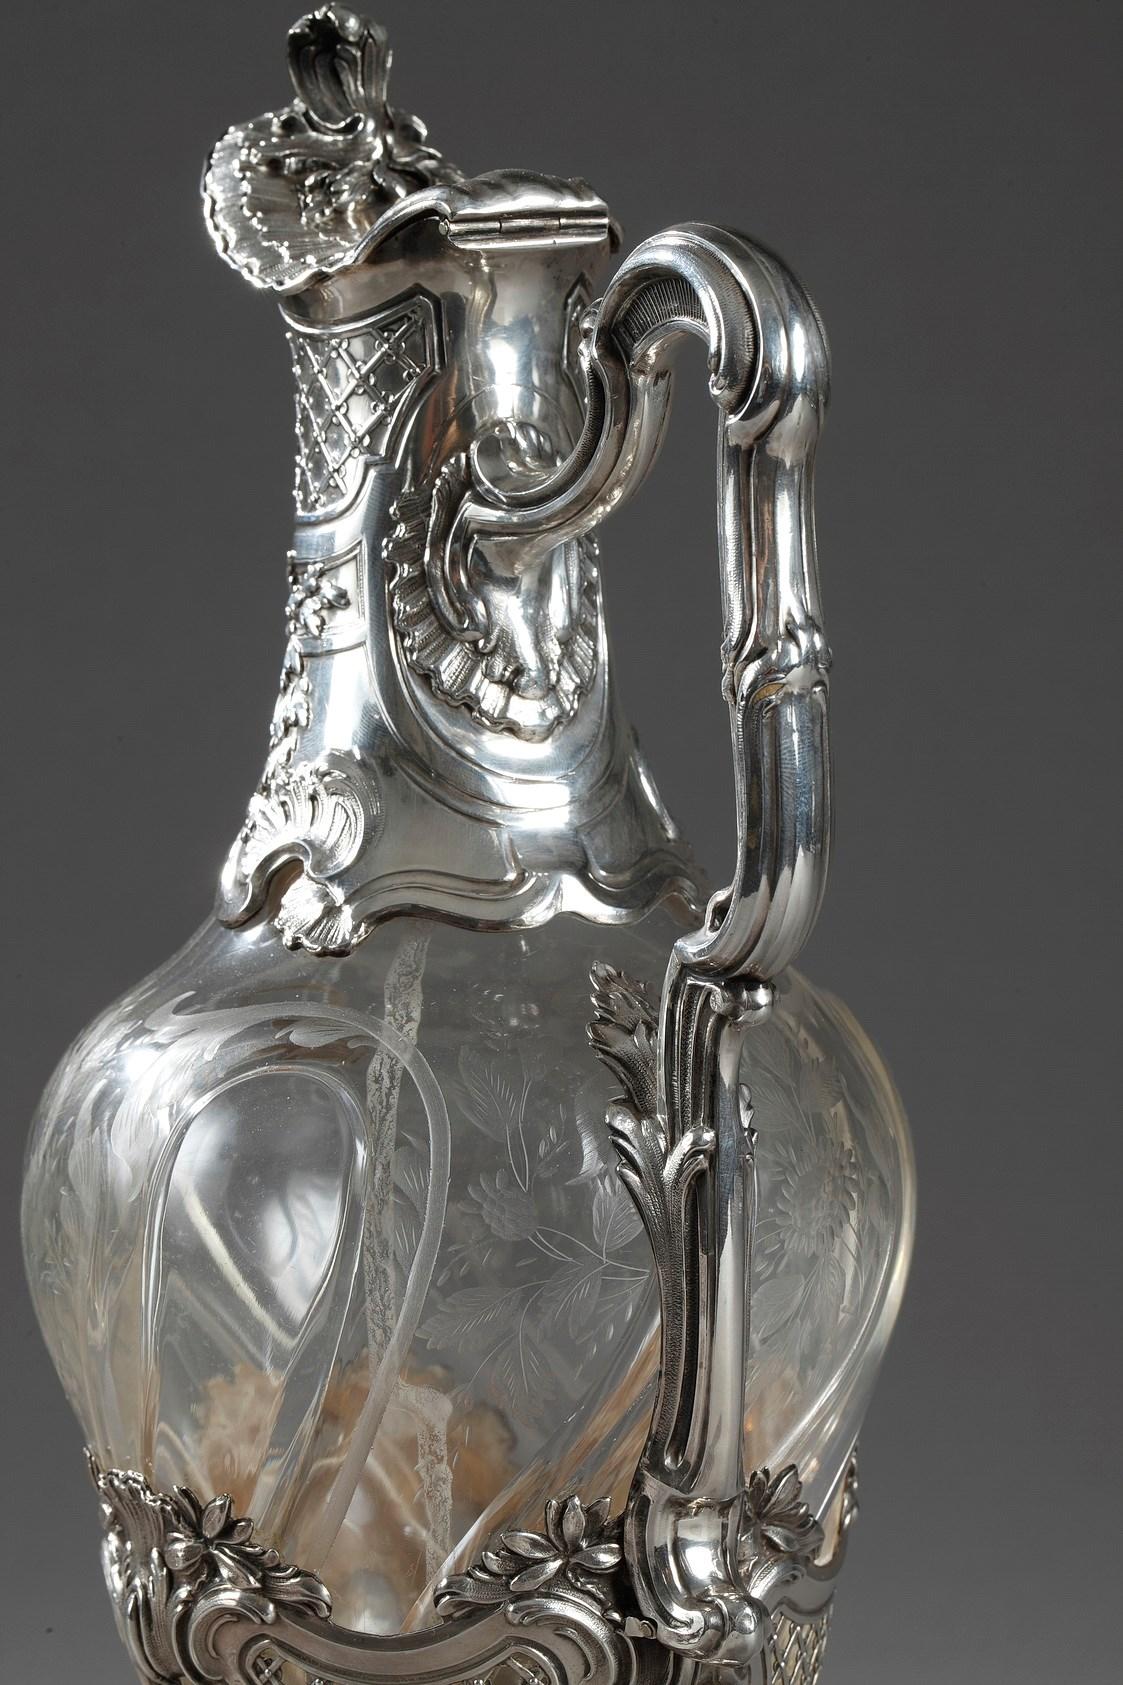 A crystal ewer blown and carved with facets in silver mounts. The crystal is engraved with flower baskets or baskets of flowers. The neck of the ewer is finely chiseled with floral motifs and grape vines. The beak is closed by a lid whose grip is